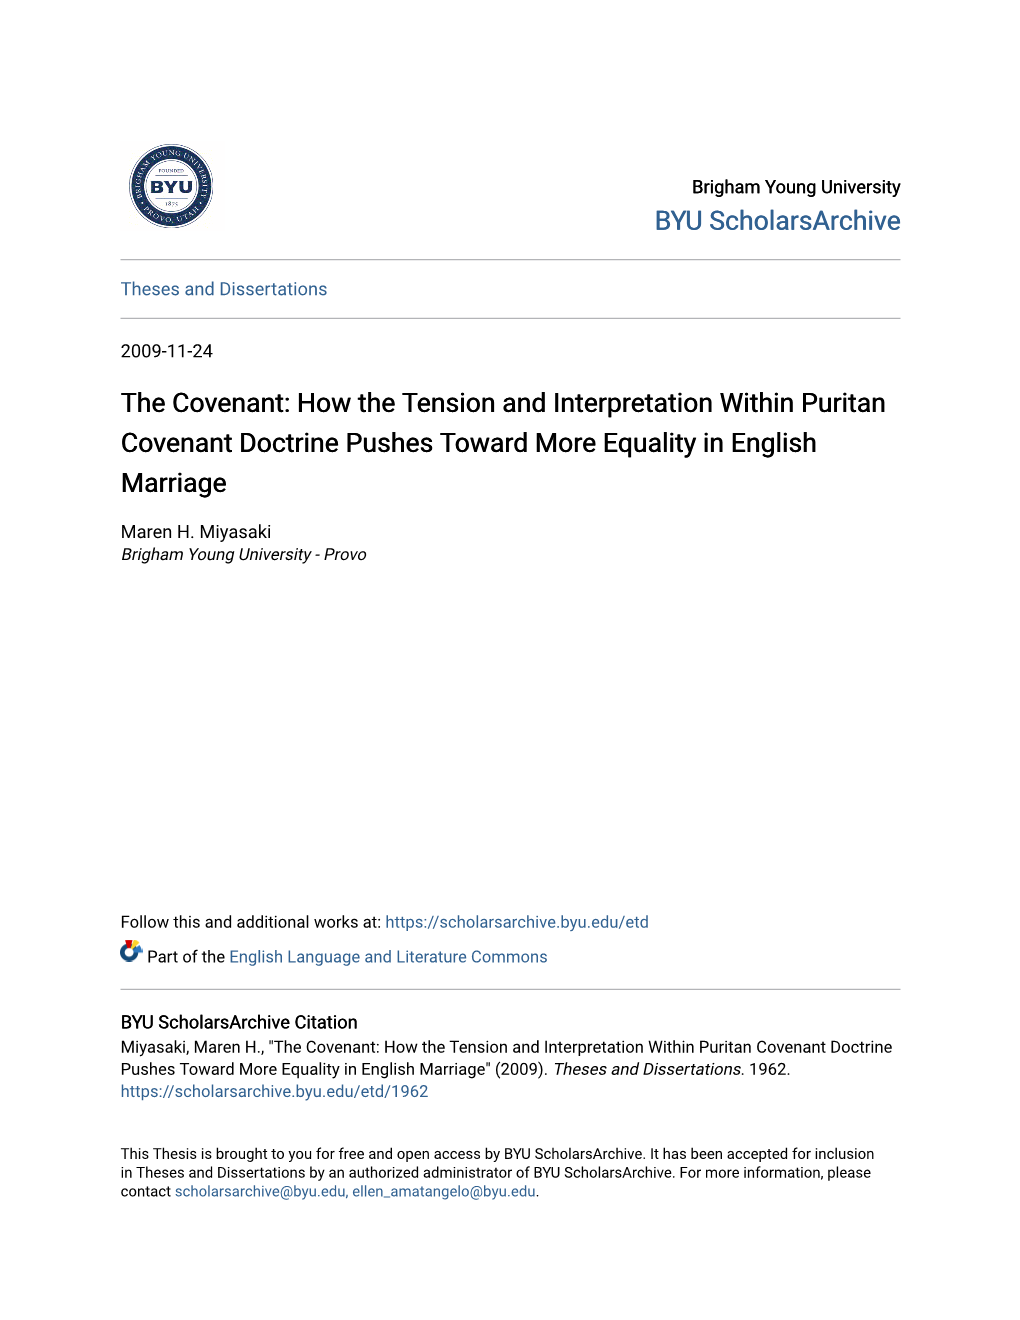 The Covenant: How the Tension and Interpretation Within Puritan Covenant Doctrine Pushes Toward More Equality in English Marriage